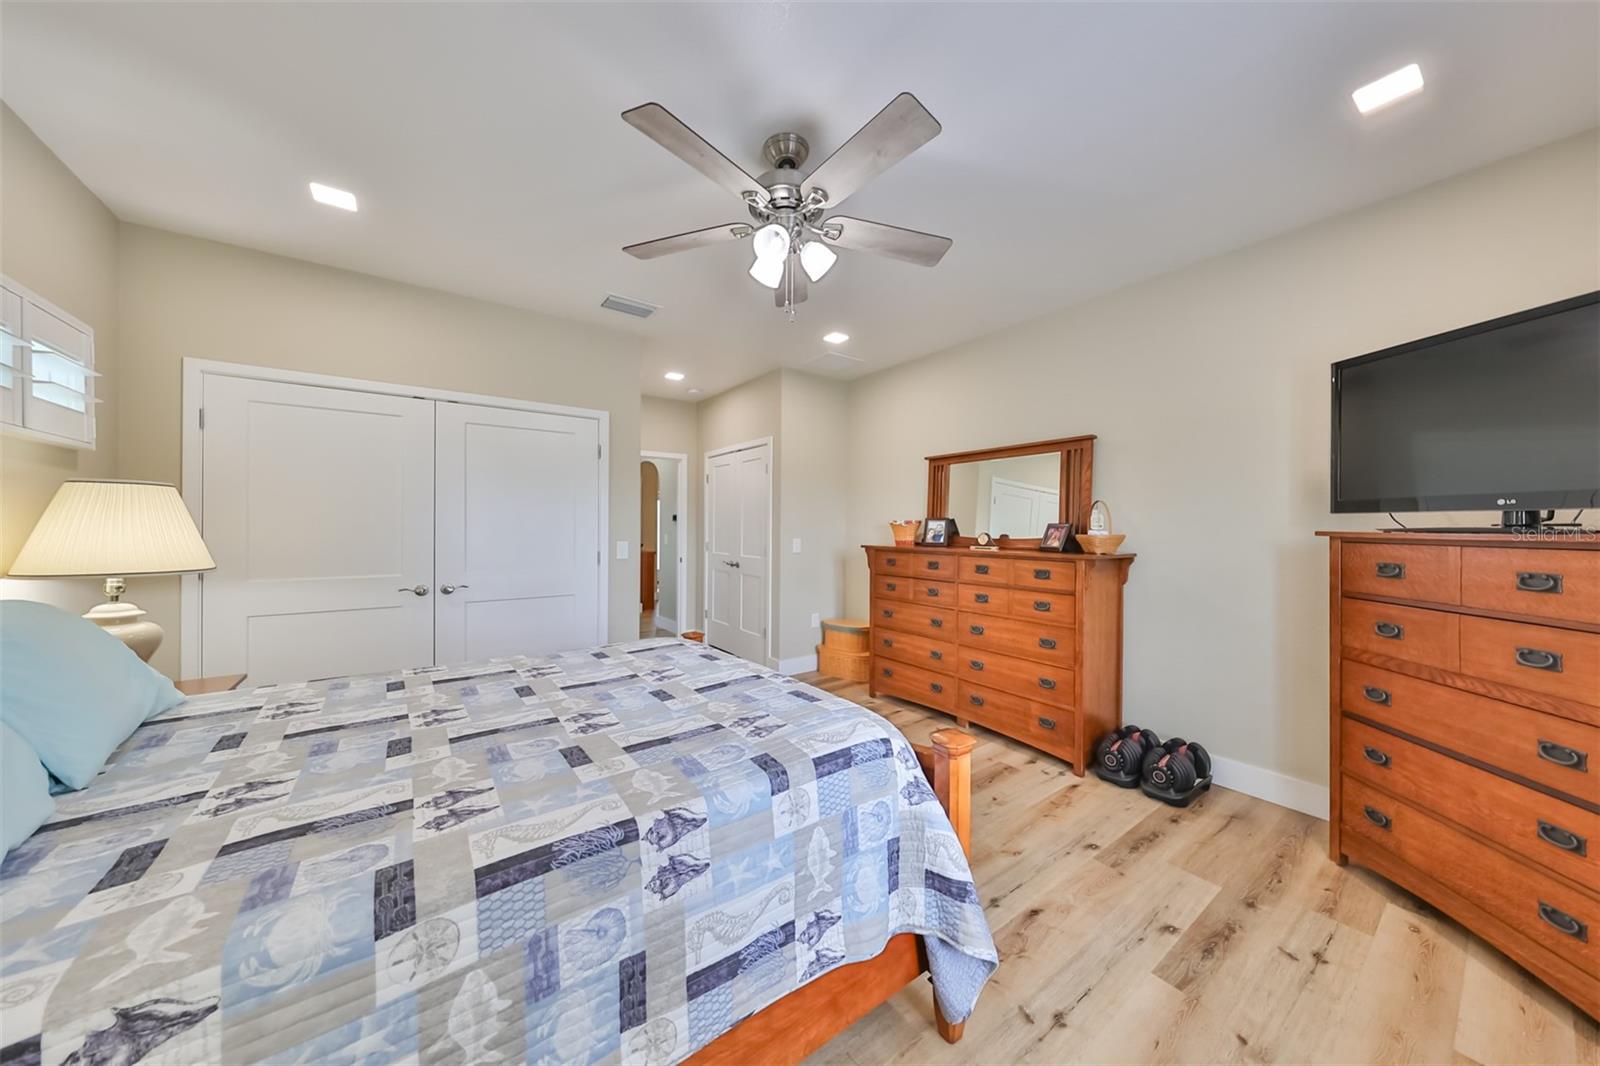 Bedroom 2 includes TWO double French door closets for extra storage space and has a ceiling fan with additional lighting.